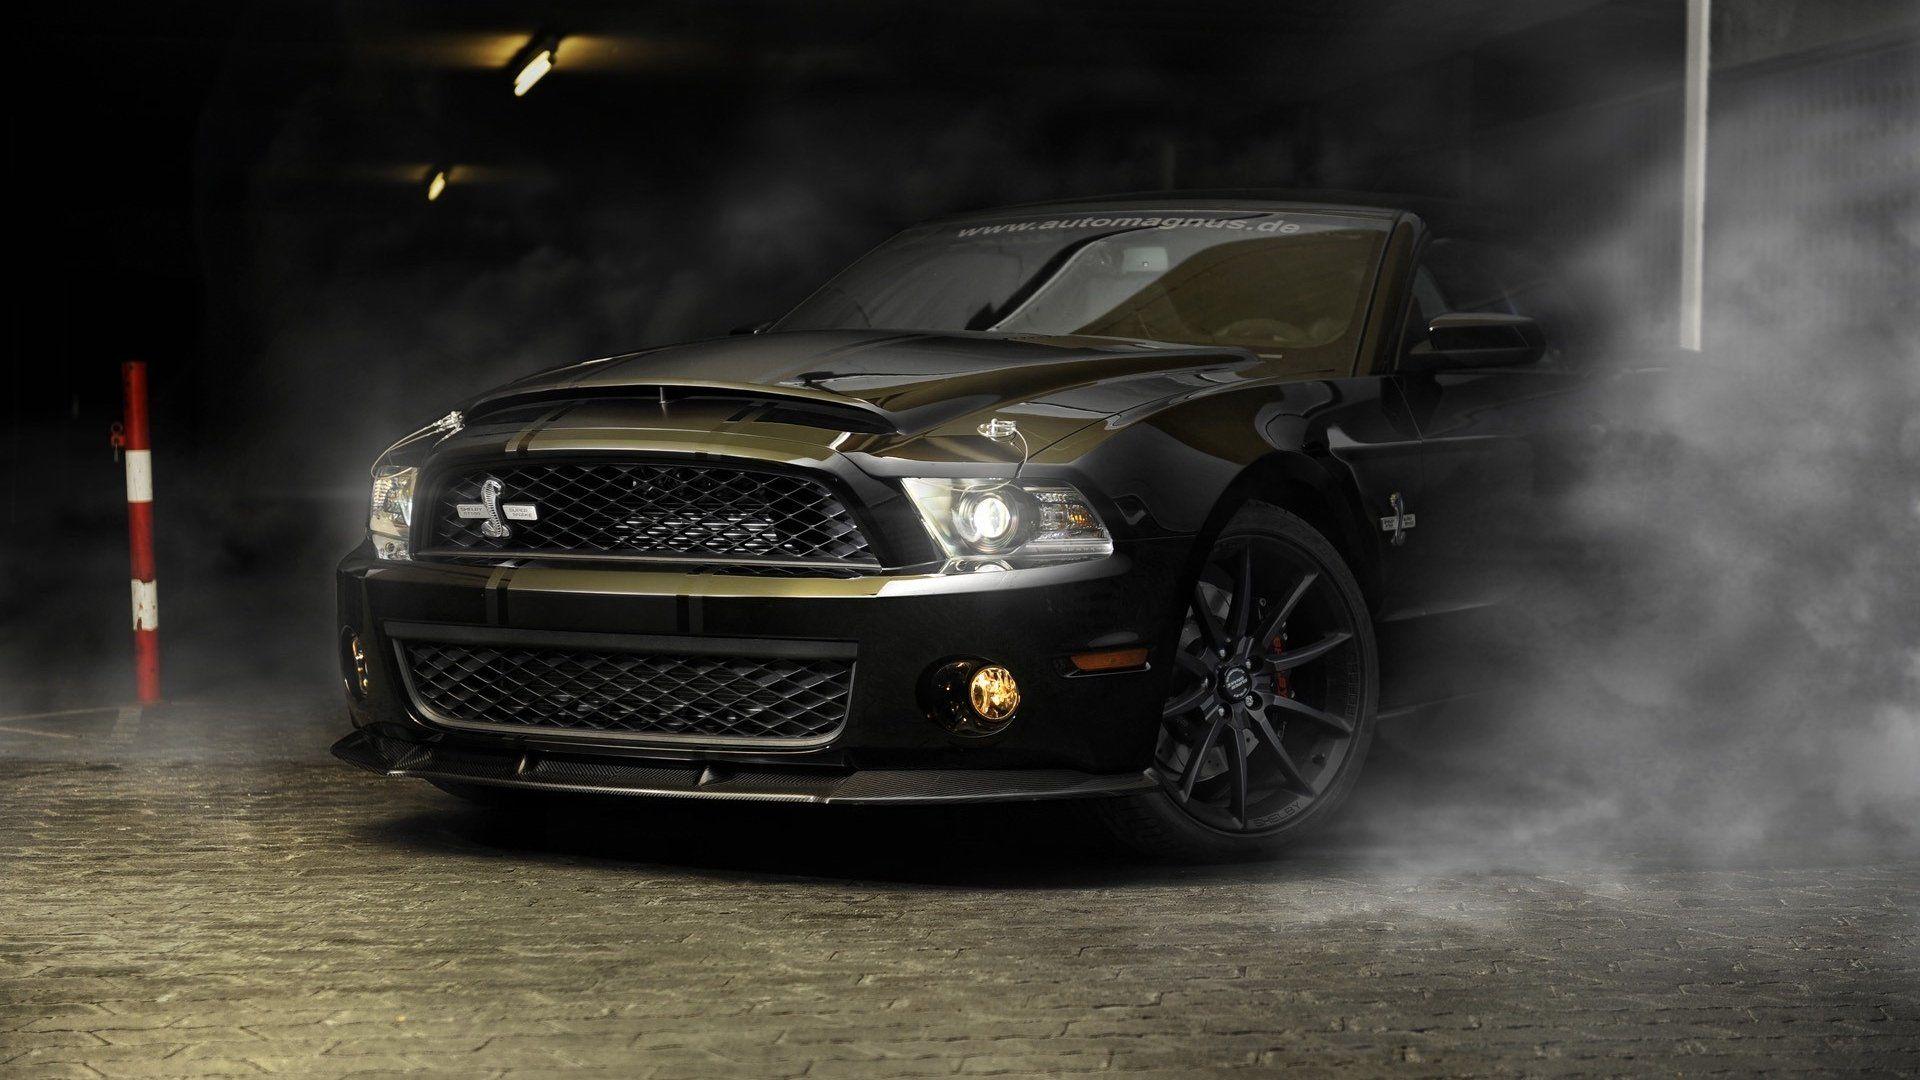 Ford Mustang Shelby GT500 Wallpaper and Background Image